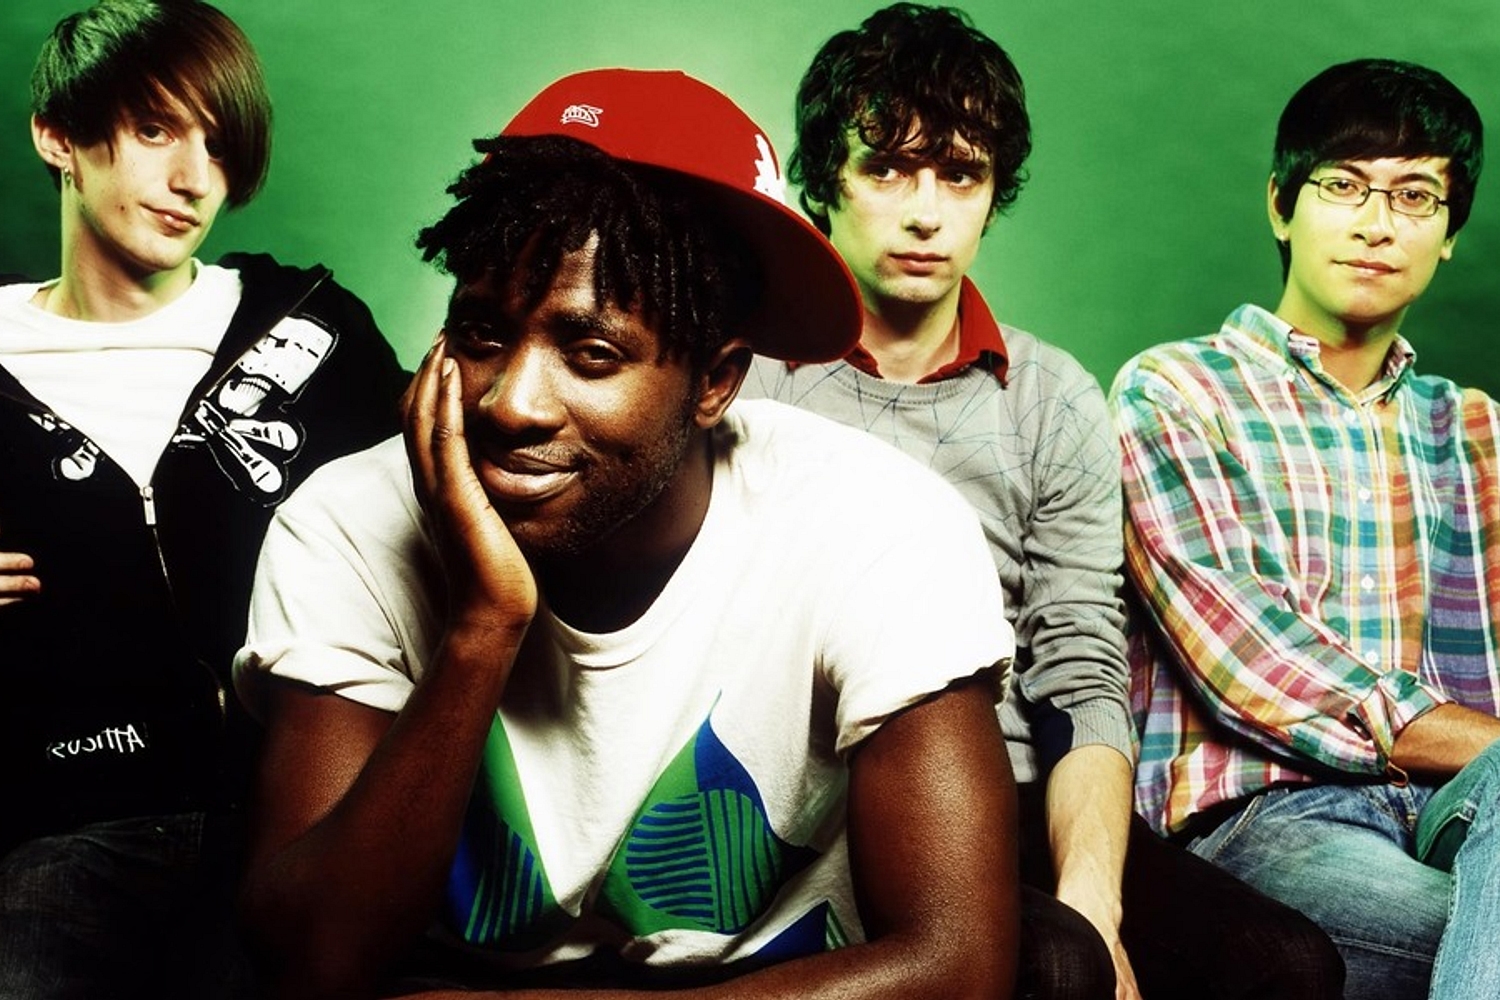 Wichita Recordings: the continuing influence of Bloc Party and 'Silent Alarm'